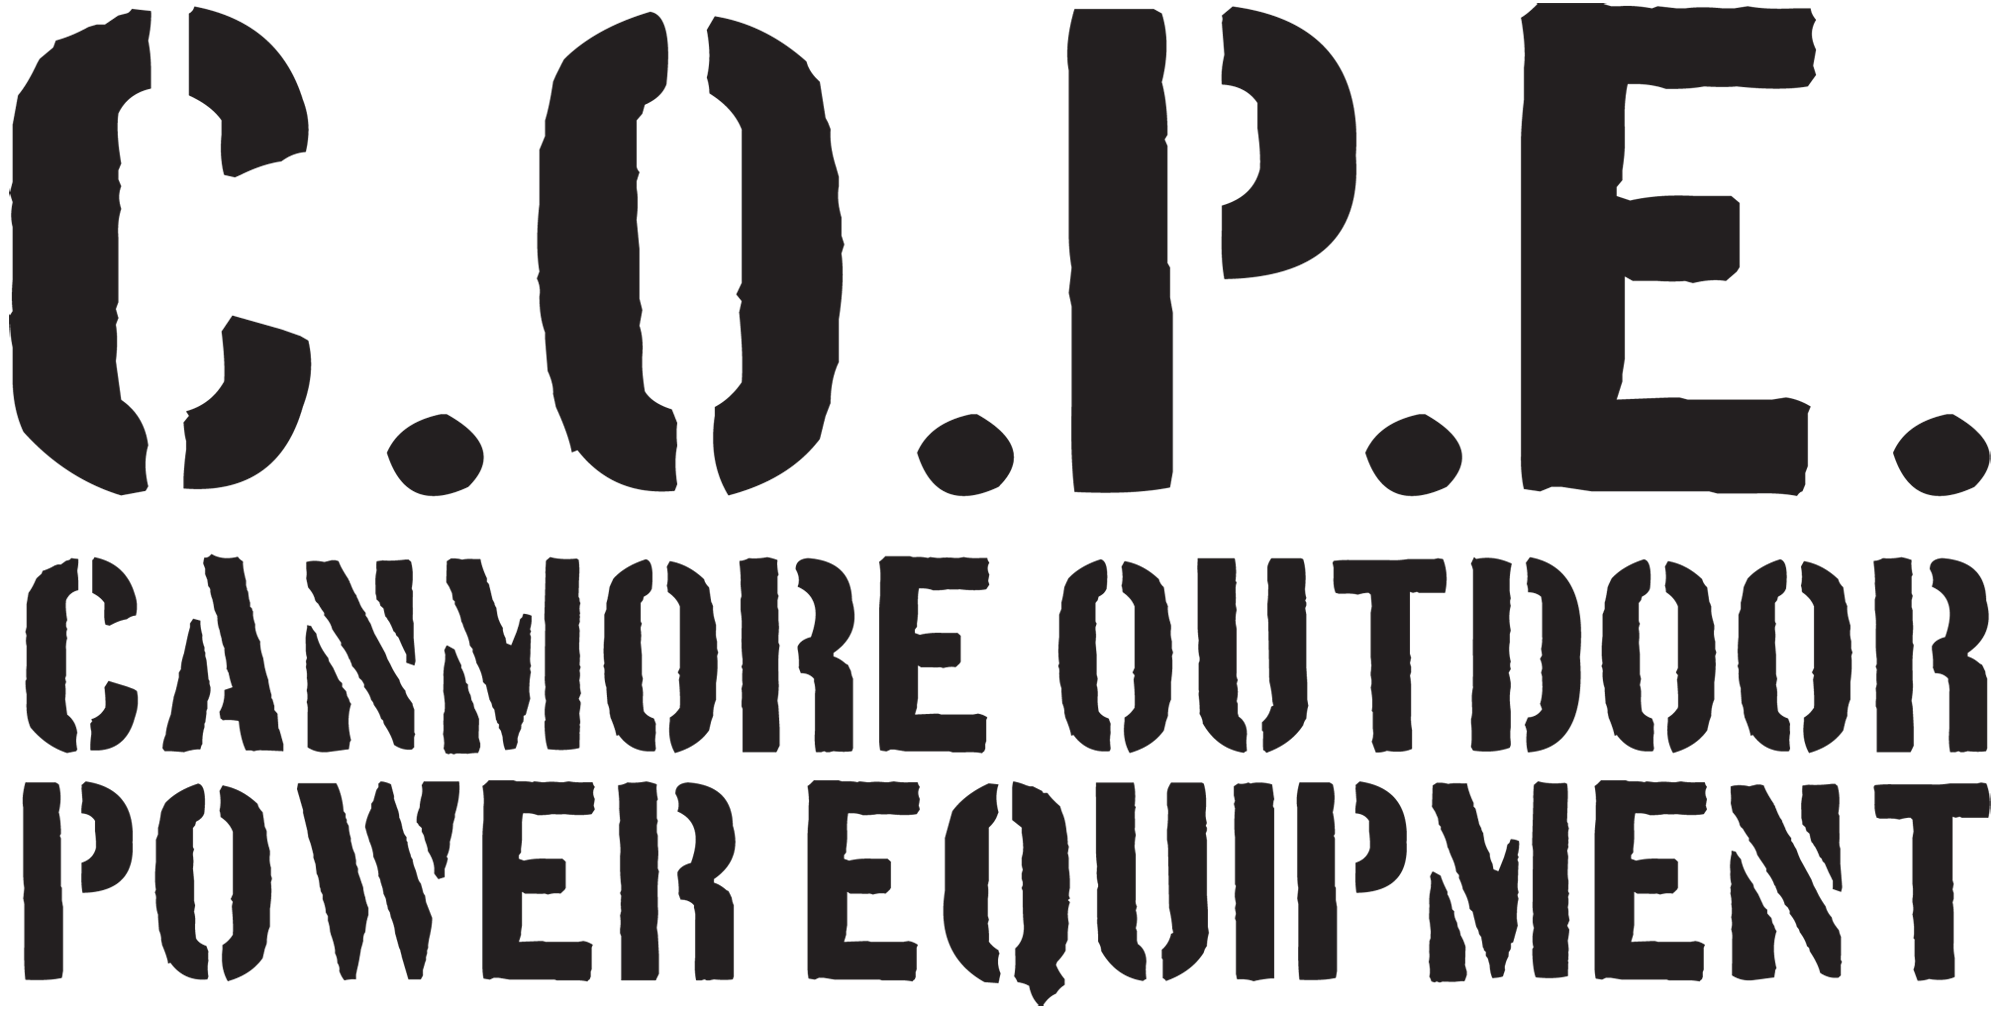 CANMORE OUTDOOR POWER EQUIPMENT LTD